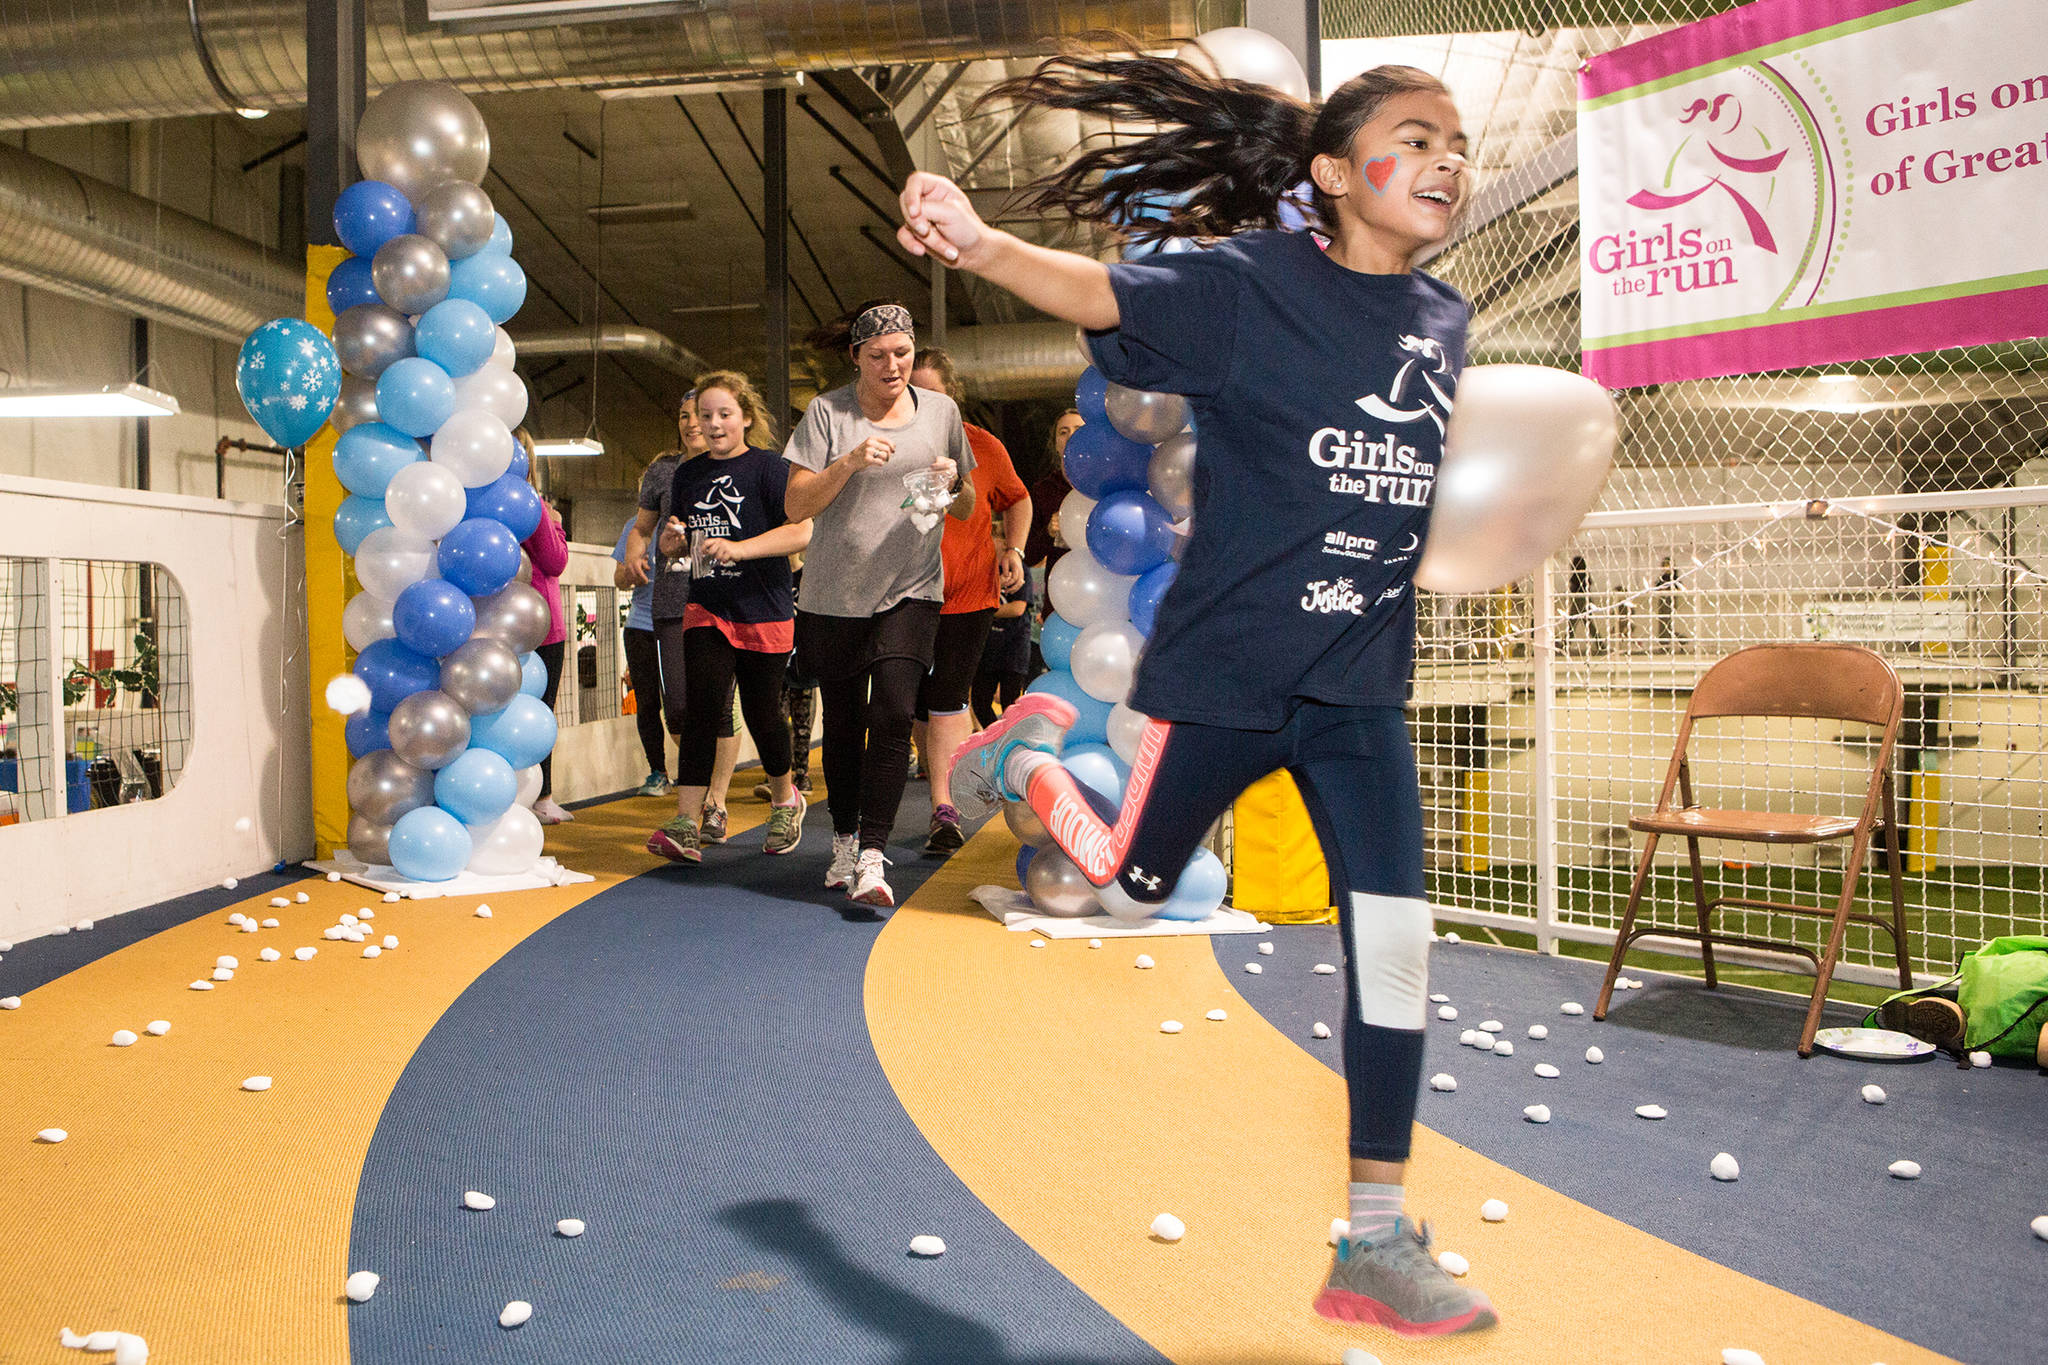 Girls on the Run participant Anjali Padhi soars around the track during a 5-kilometer run in the Wells Fargo Dimond Park Field House in December. (Courtesy Photo | Natalie Watson)